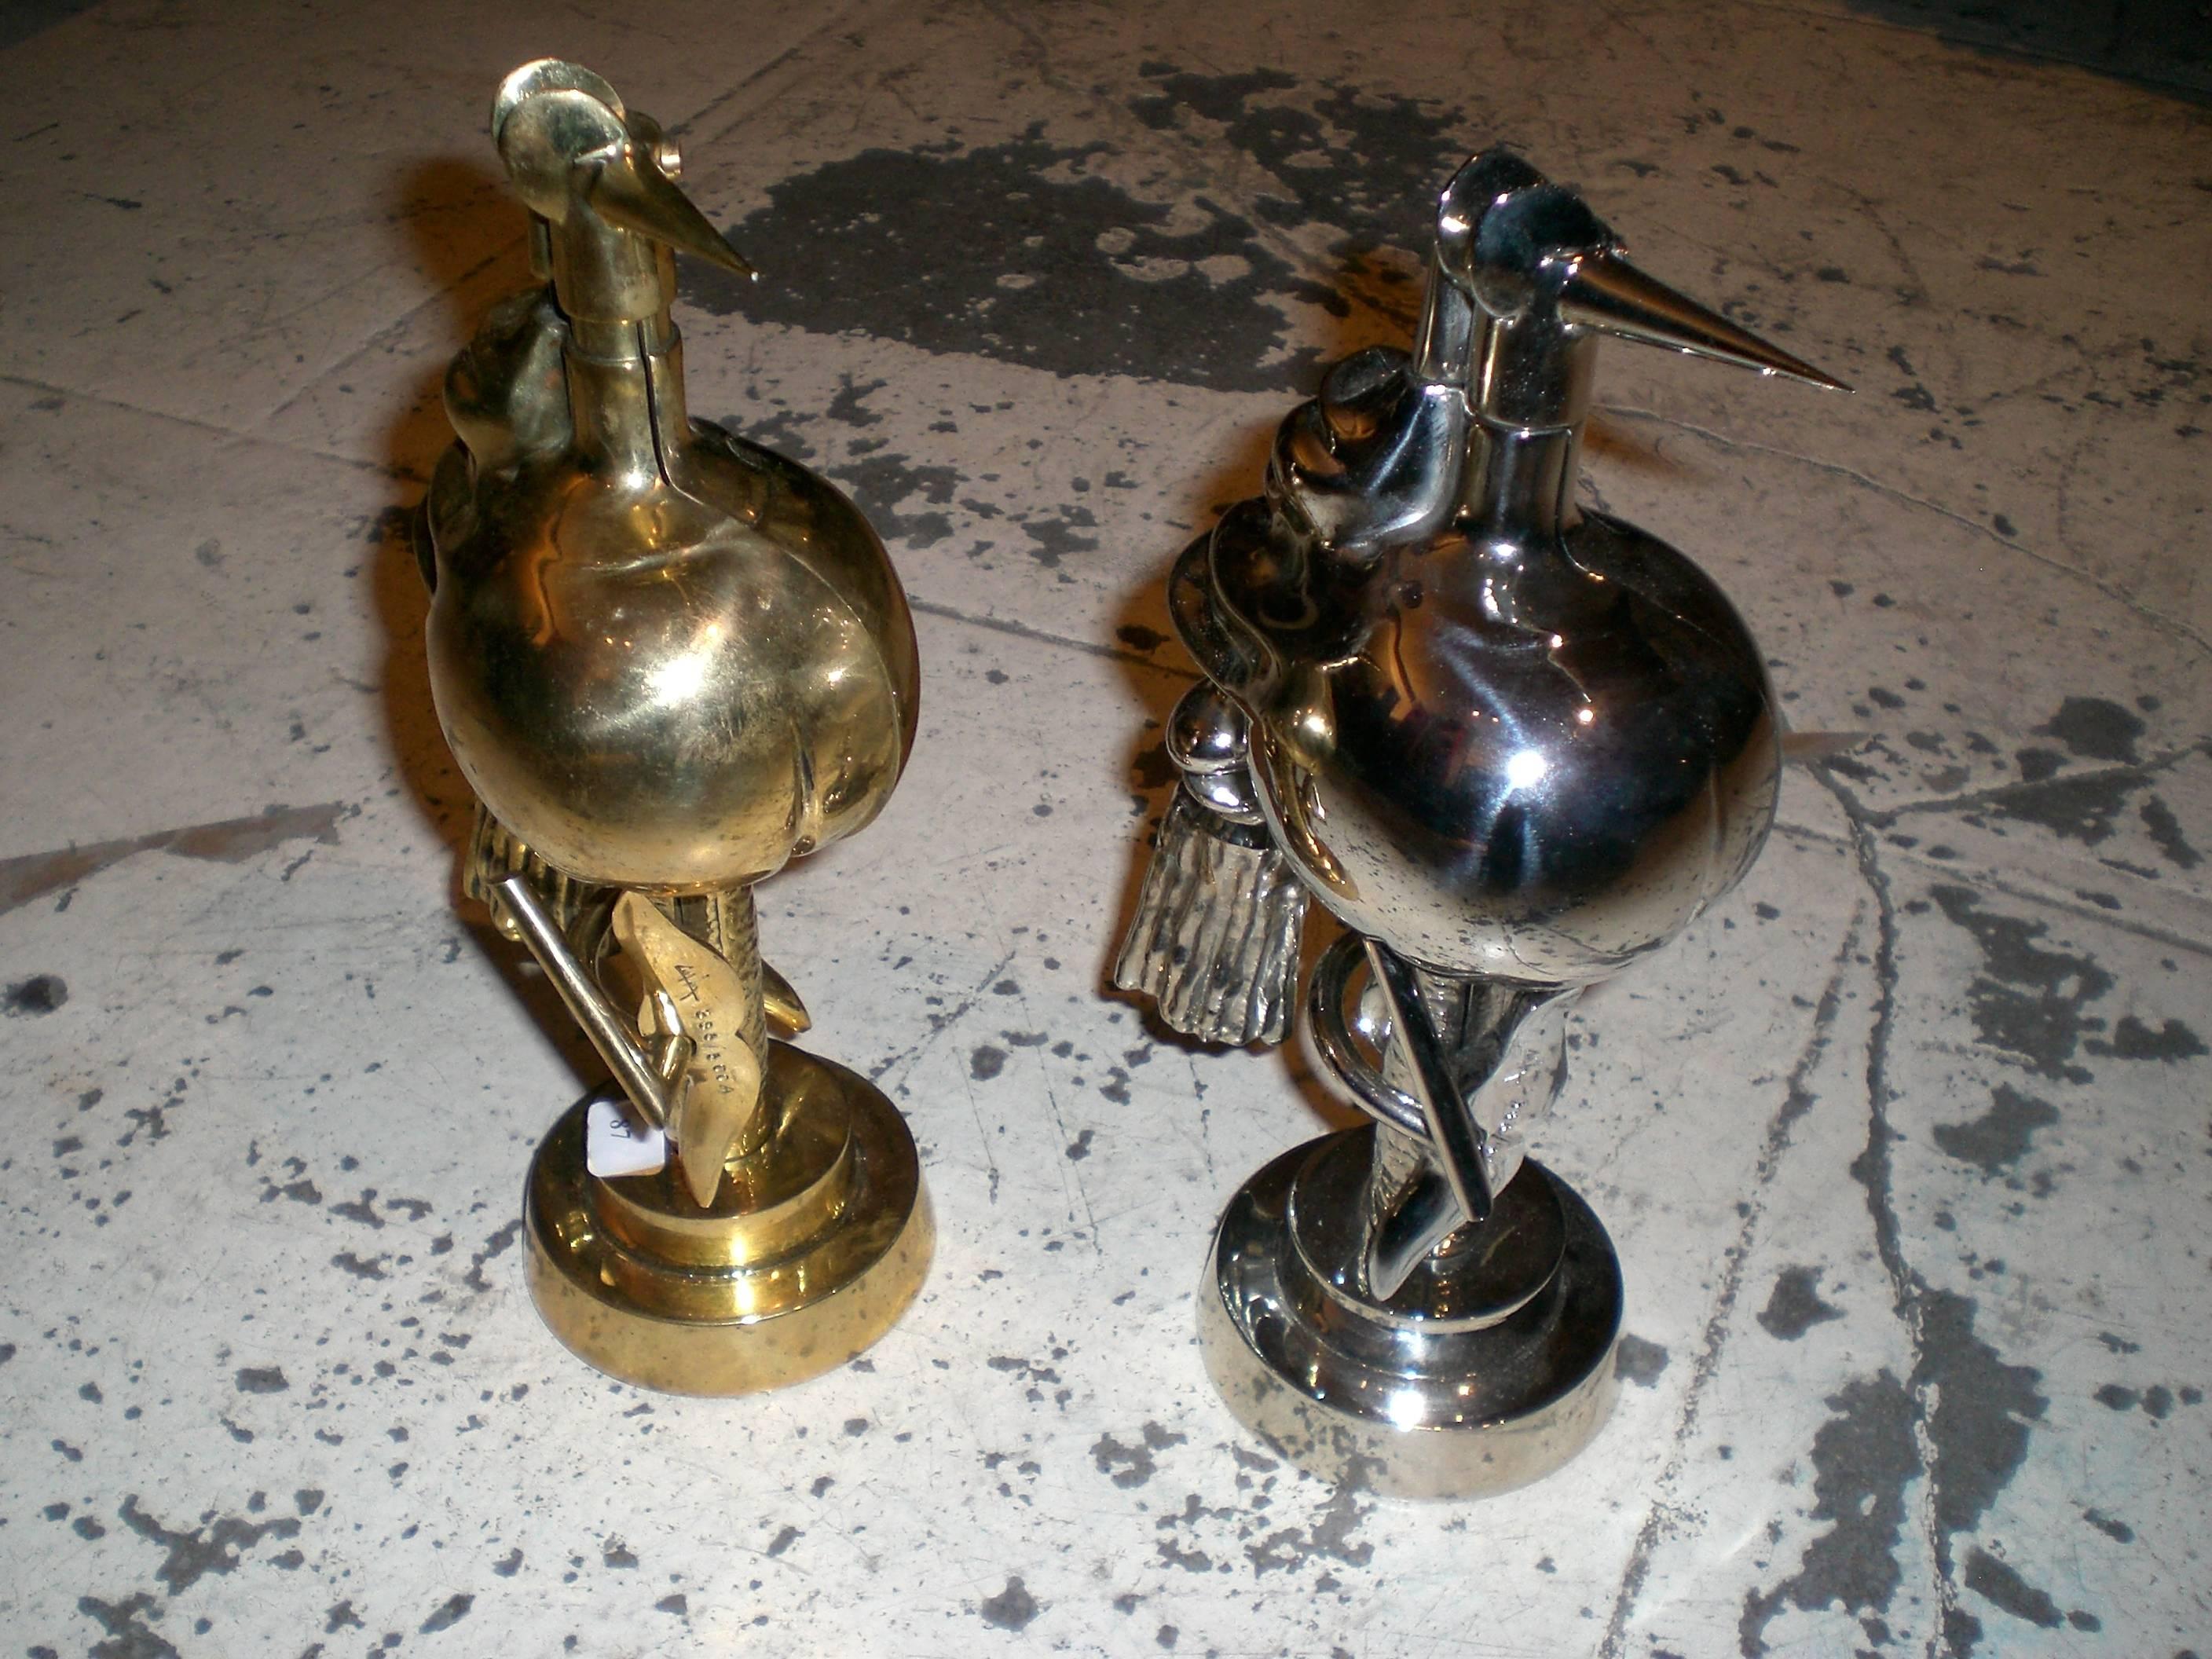 Wilfredo Lam ( A Cuban artist, 1902-1982), pair of sculptures “Bird of fire, Bird of iron” - polished brass and chrome, metal plated - signed and numbered - Edition of 500 pieces - number 388 A and 388 B - 
very few pieces on the market,